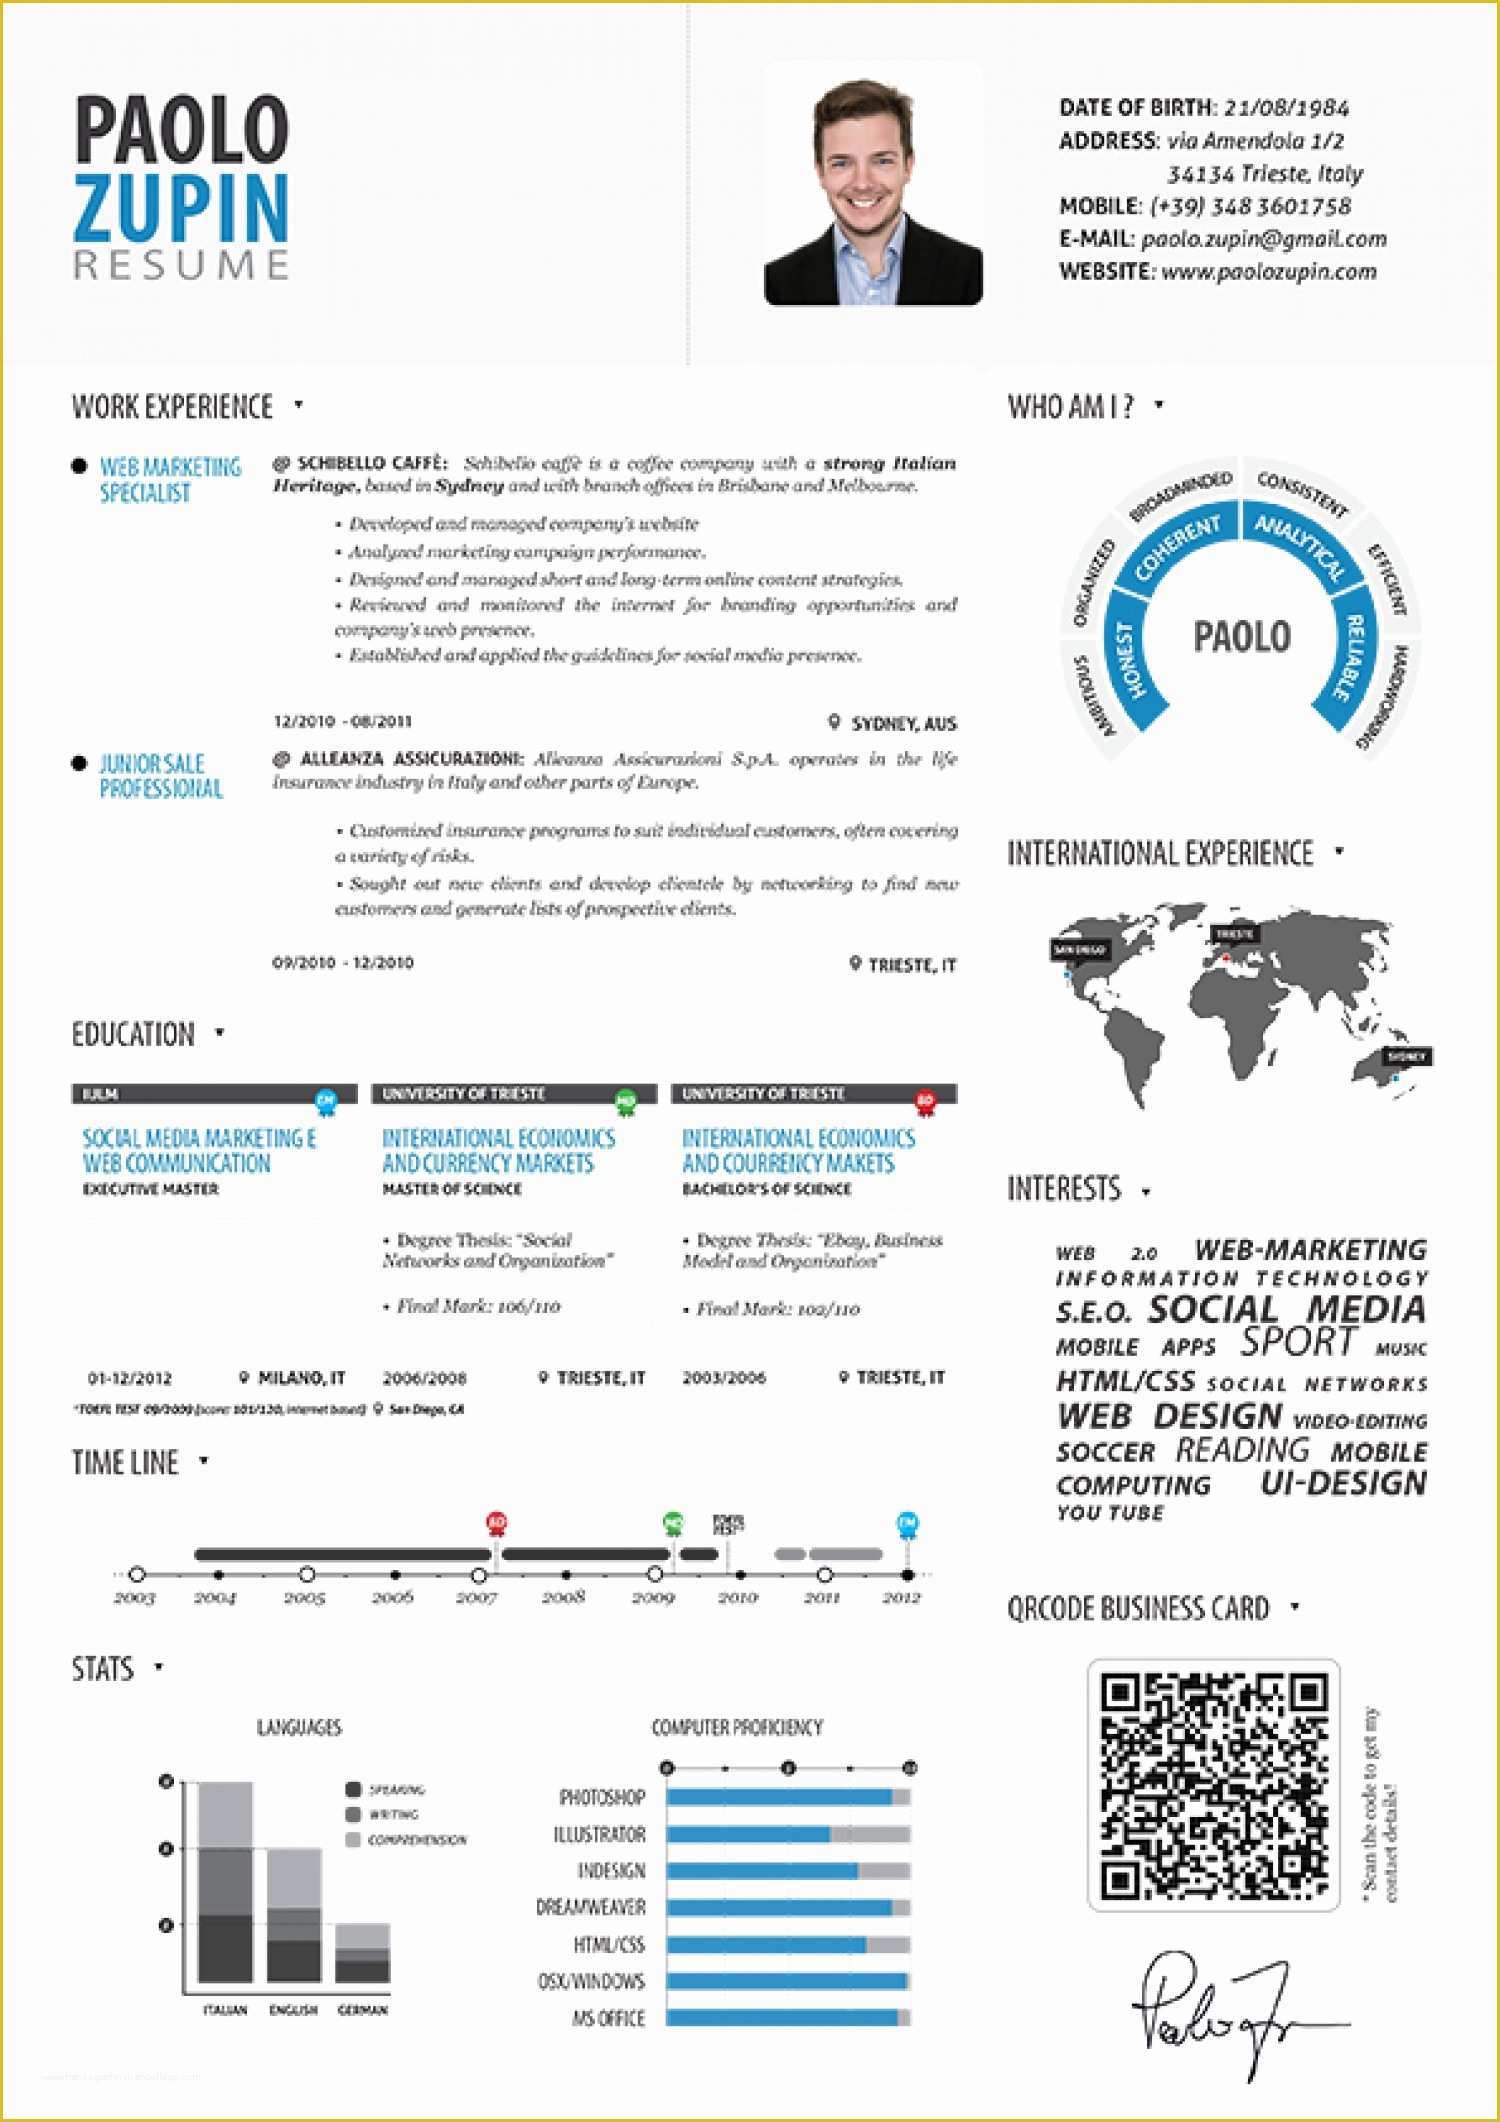 Infographic Resume Template Free Of Paolo Zupin Infographic Resume